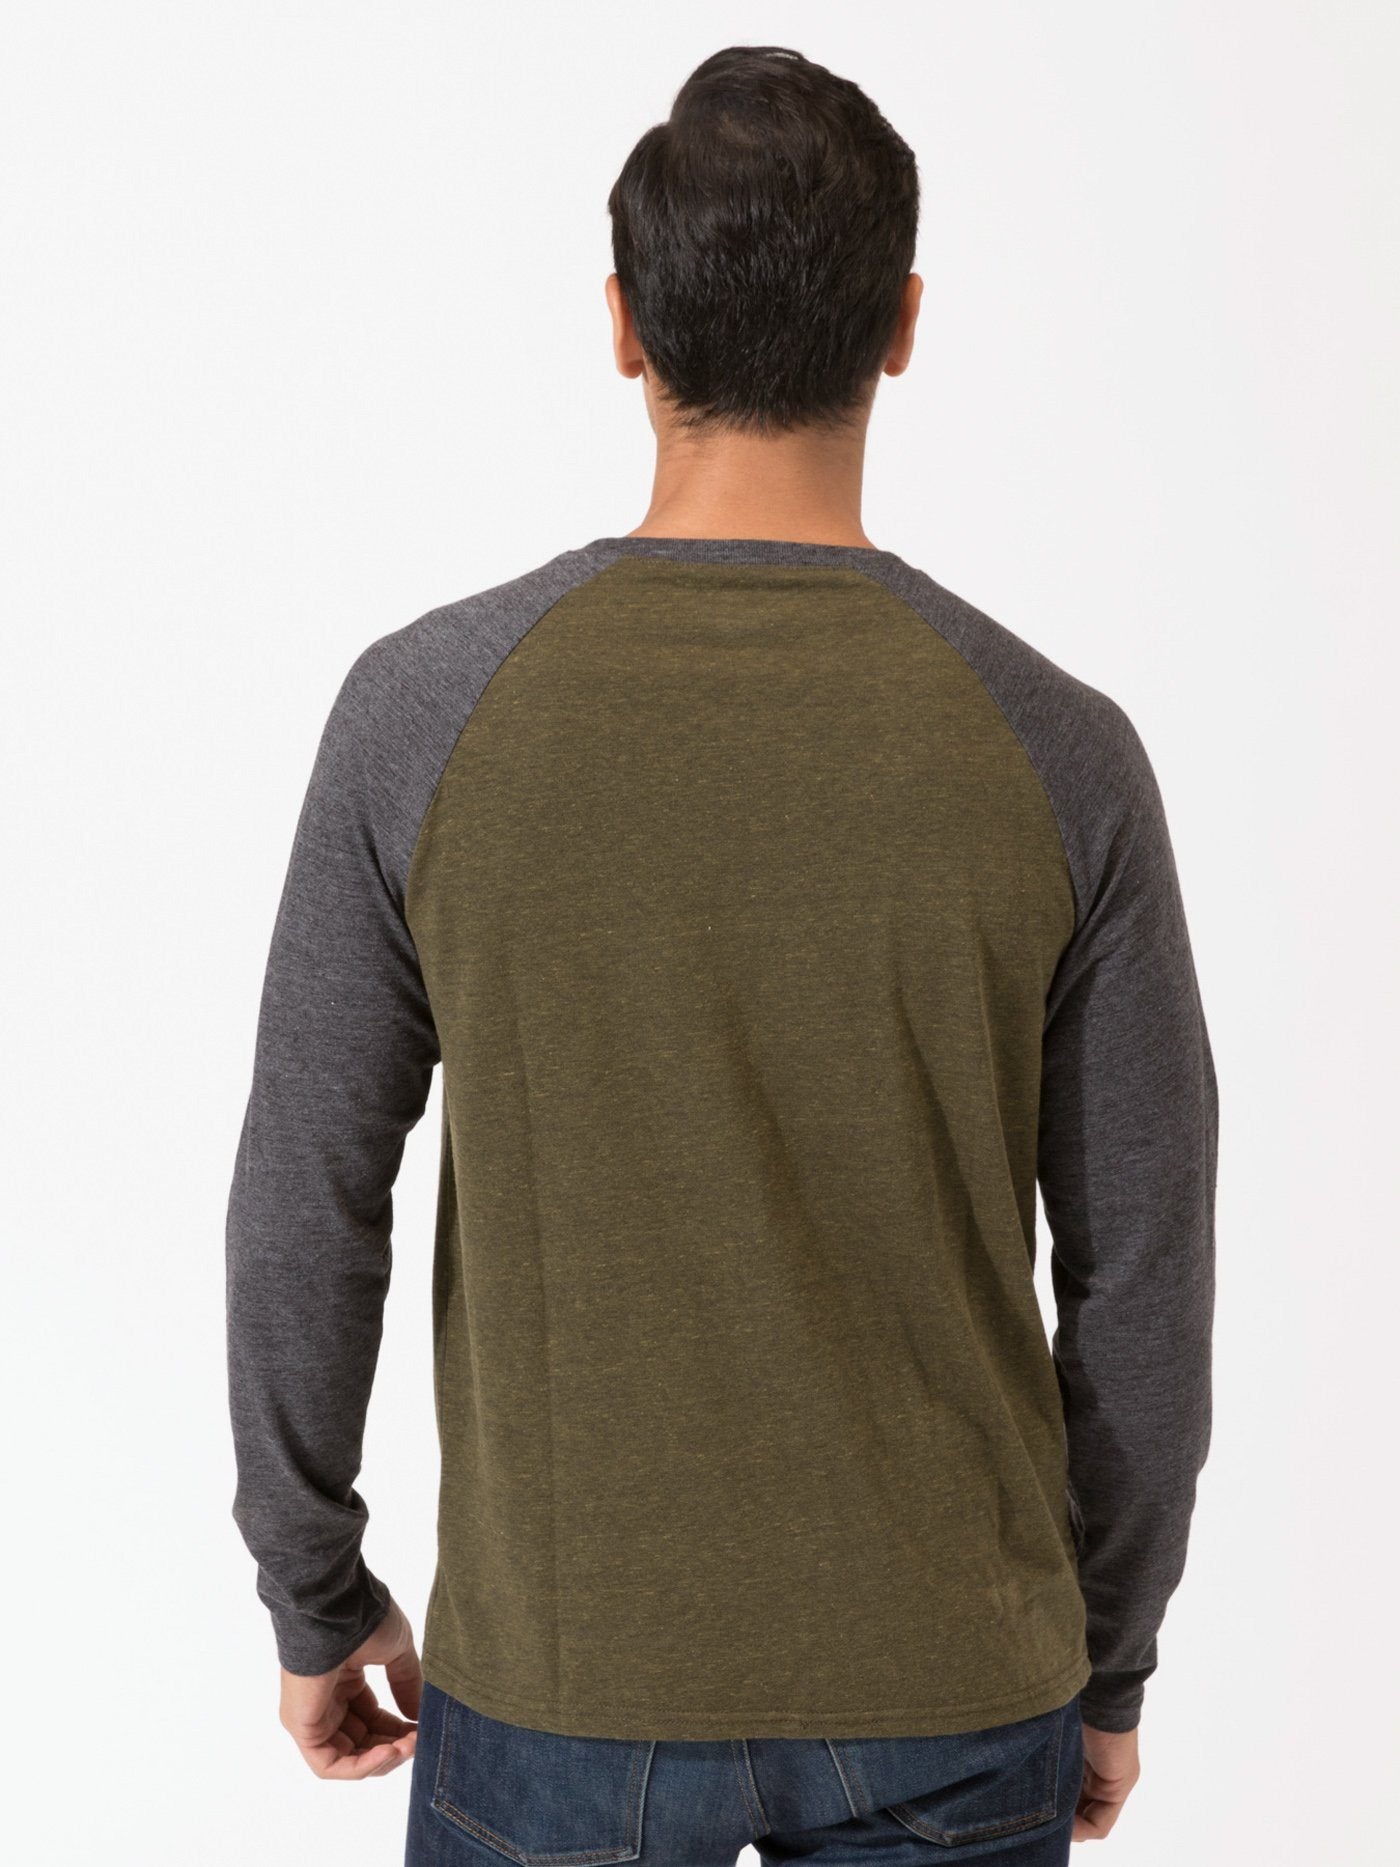 Long Sleeve Triblend Raglan Colorblock Henley Mens Tops Threads 4 Thought 